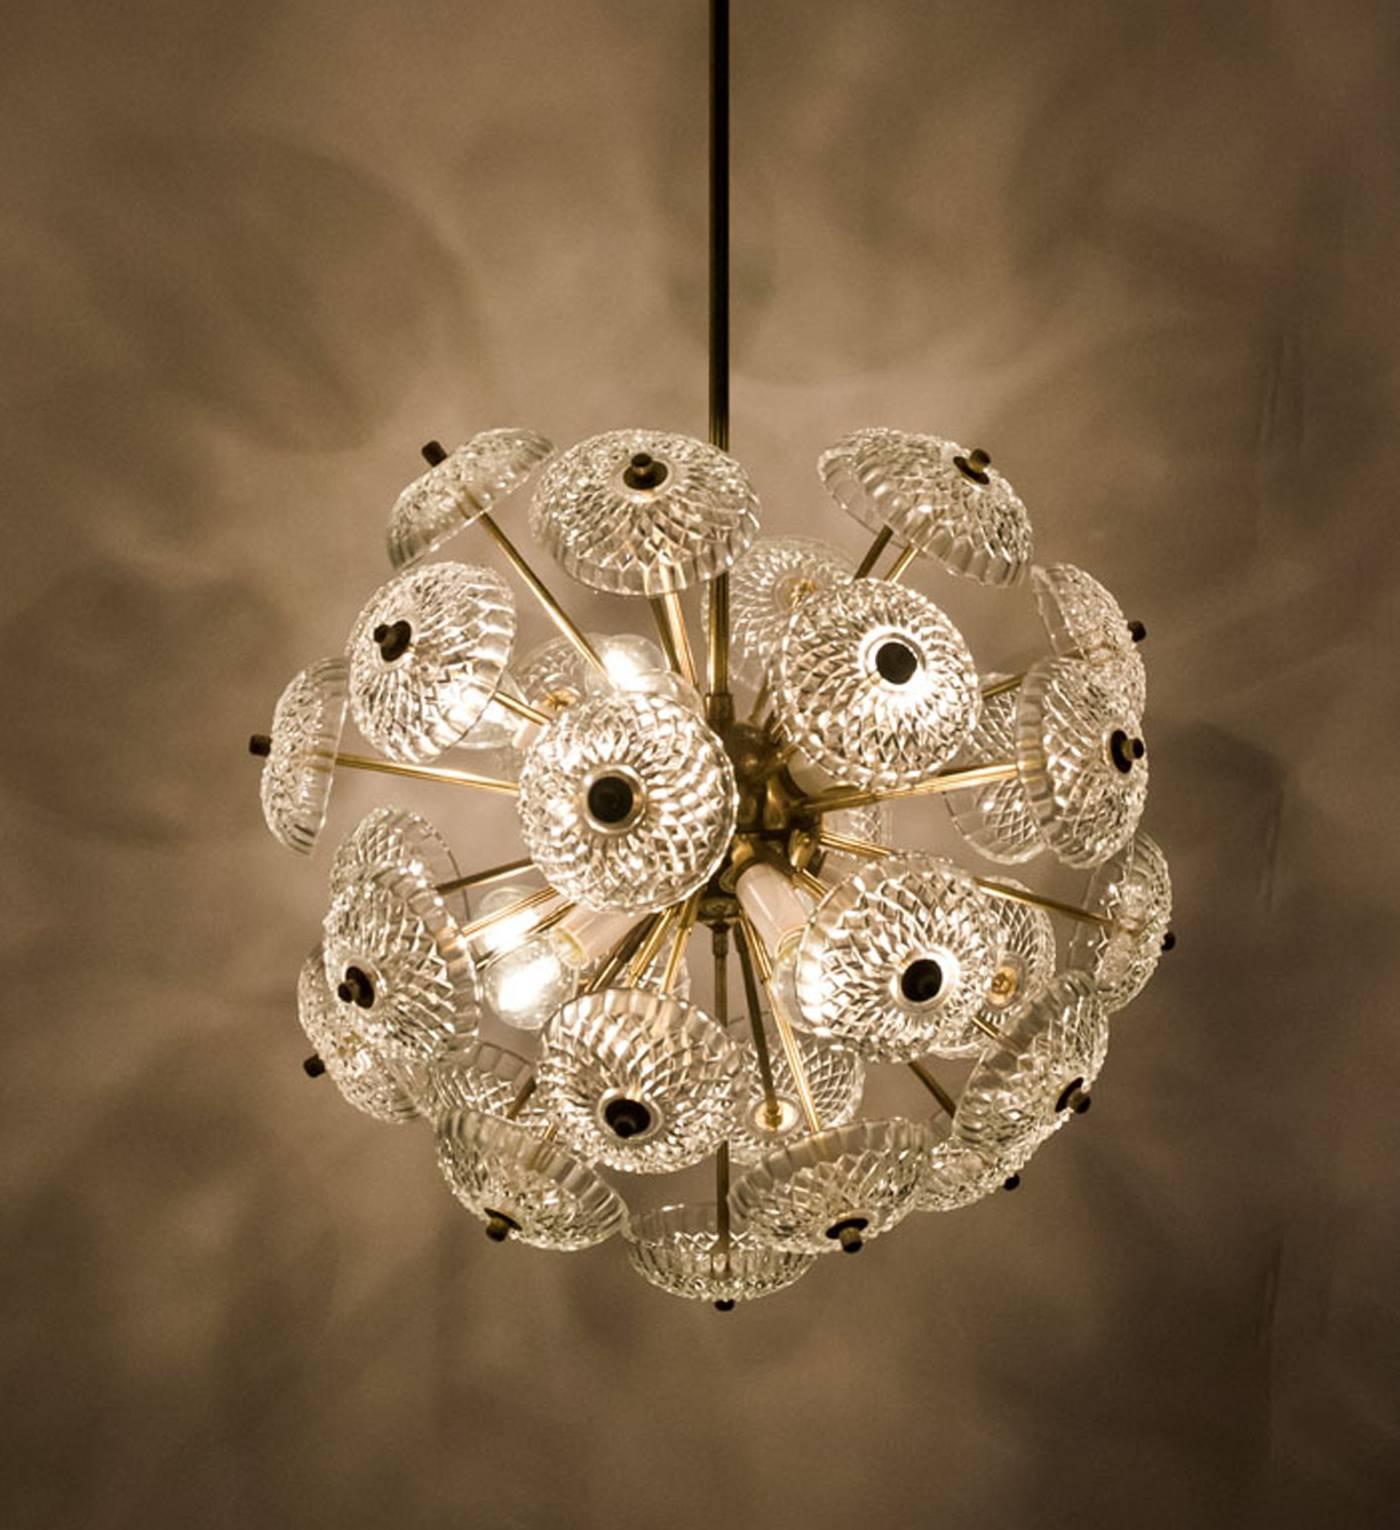 Set of max 5 stunning large brass chandeliers in style of Emil Stejnar. Made of brass with stylish glass disc glass light diffuses. The art glass gives a nice diffuse light effect and a nice pattern on ceiling, walls and floor. 

Each Sputnik has